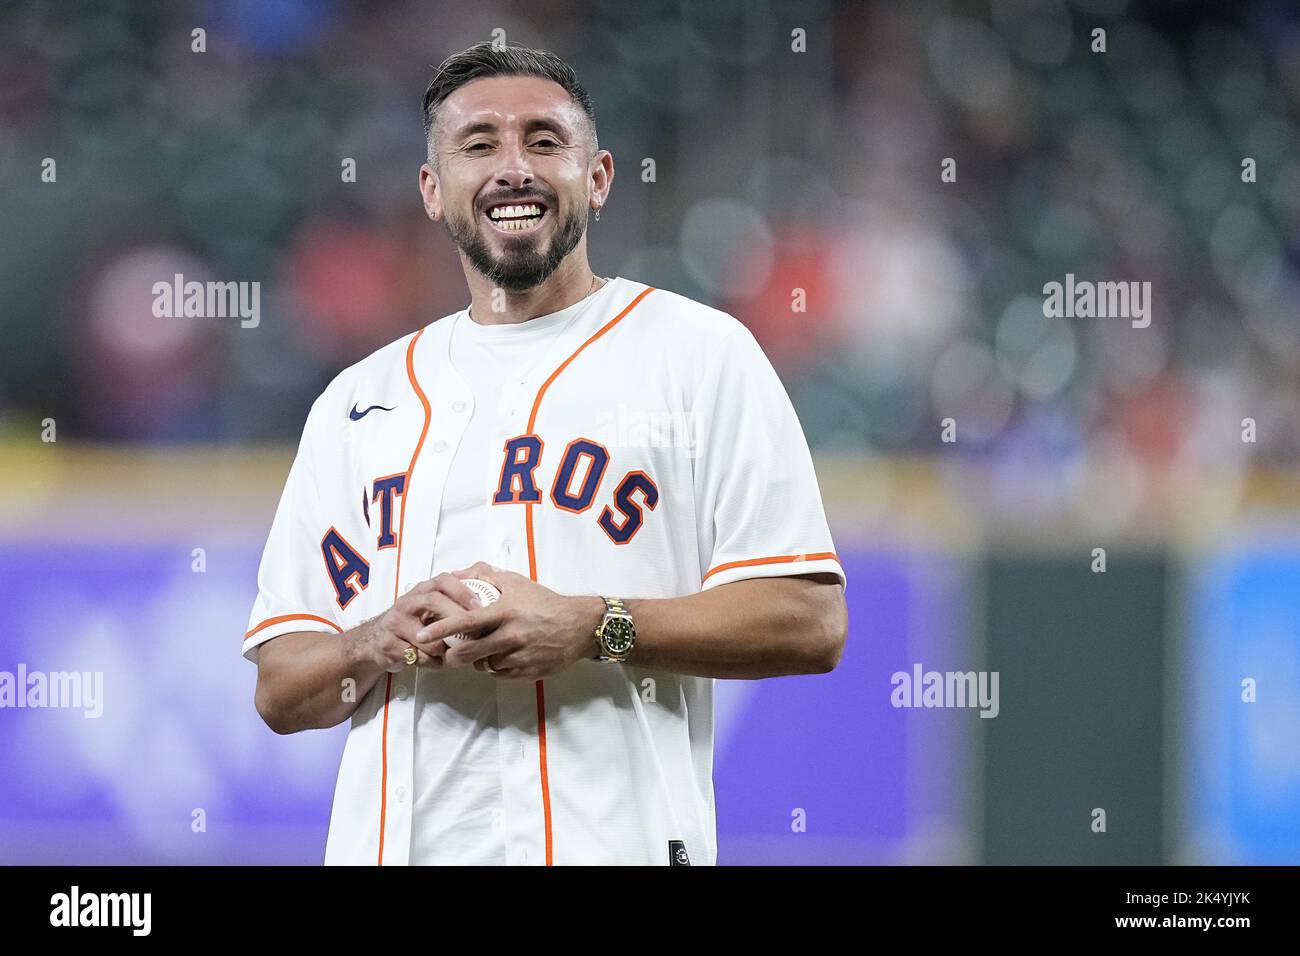 Houston, United States. 04th Oct, 2022. Héctor Herrera, a footballer from the Mexico national team and the Houston Dynamo, throws out the ceremonial first pitch before a game between the Houston Astros and the Philadelphia Phillies at Minute Maid Park in Houston, Texas on Tuesday, October 4, 2022. Photo by Kevin M. Cox/UPI Credit: UPI/Alamy Live News Stock Photo